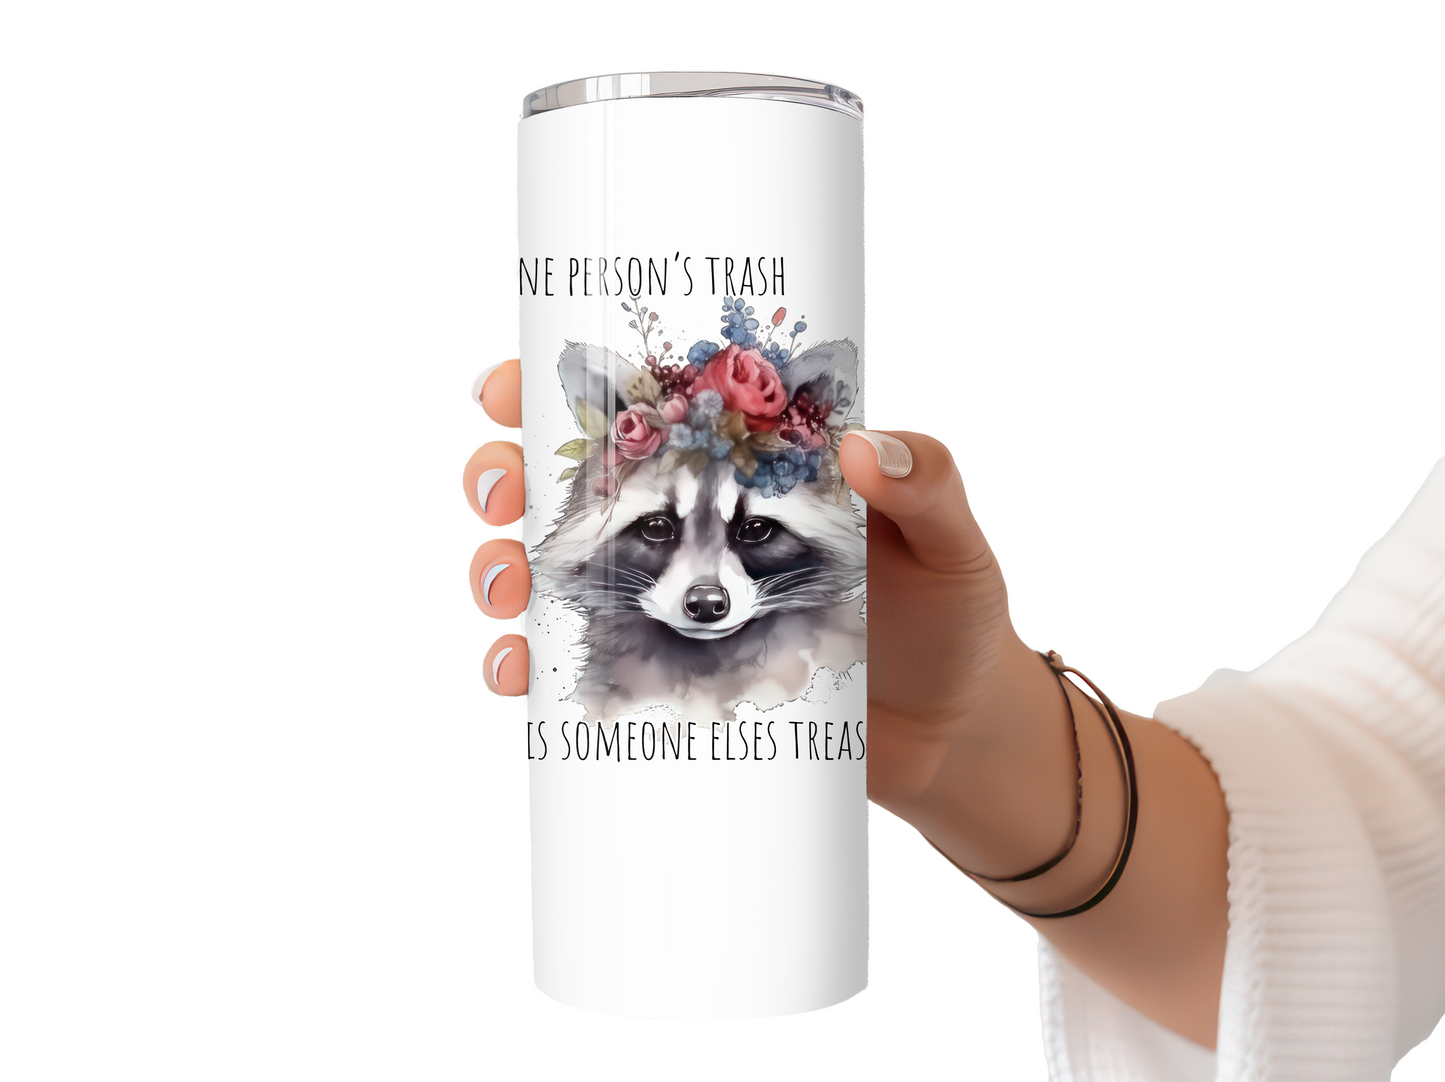 Raccoon One person's trash is someone else treasure quote mug tumbler collection gift set